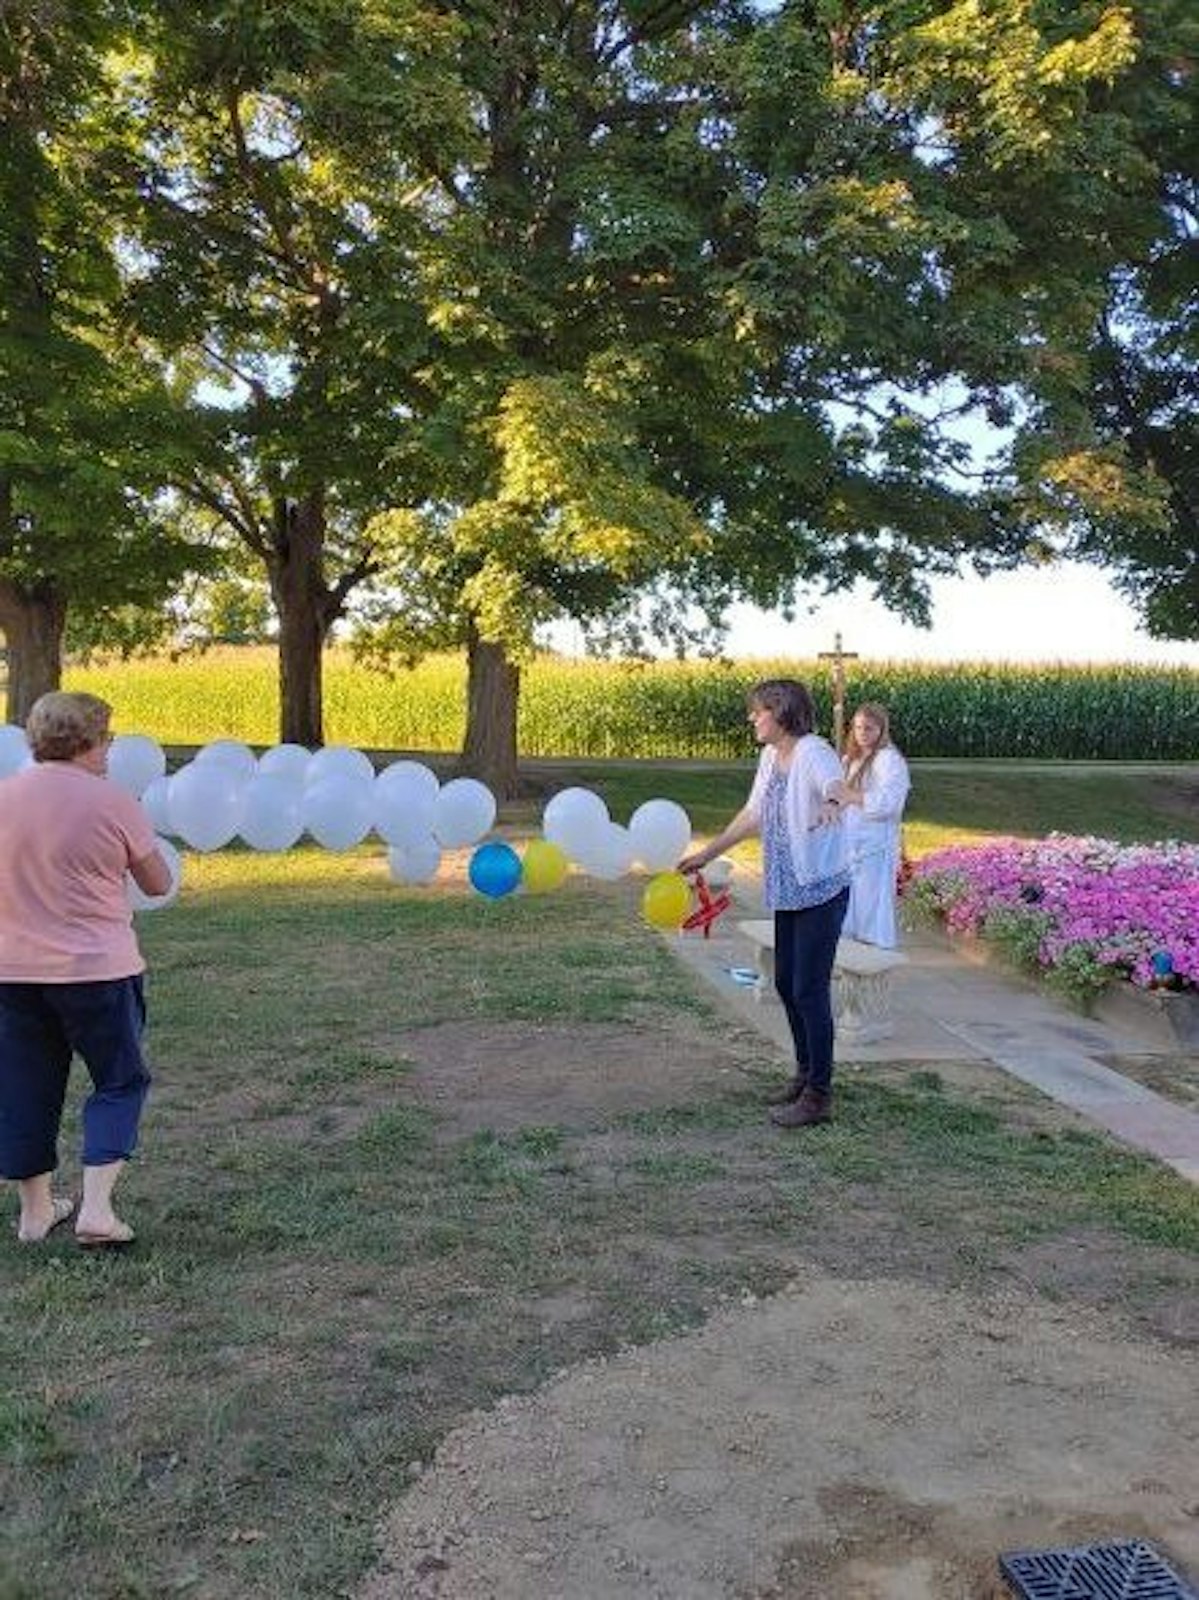 On Sept. 8, the feast of the Nativity of the Blessed Virgin Mary, the parish rededicated the rosary walk, including a balloon rosary that was released into the sky.